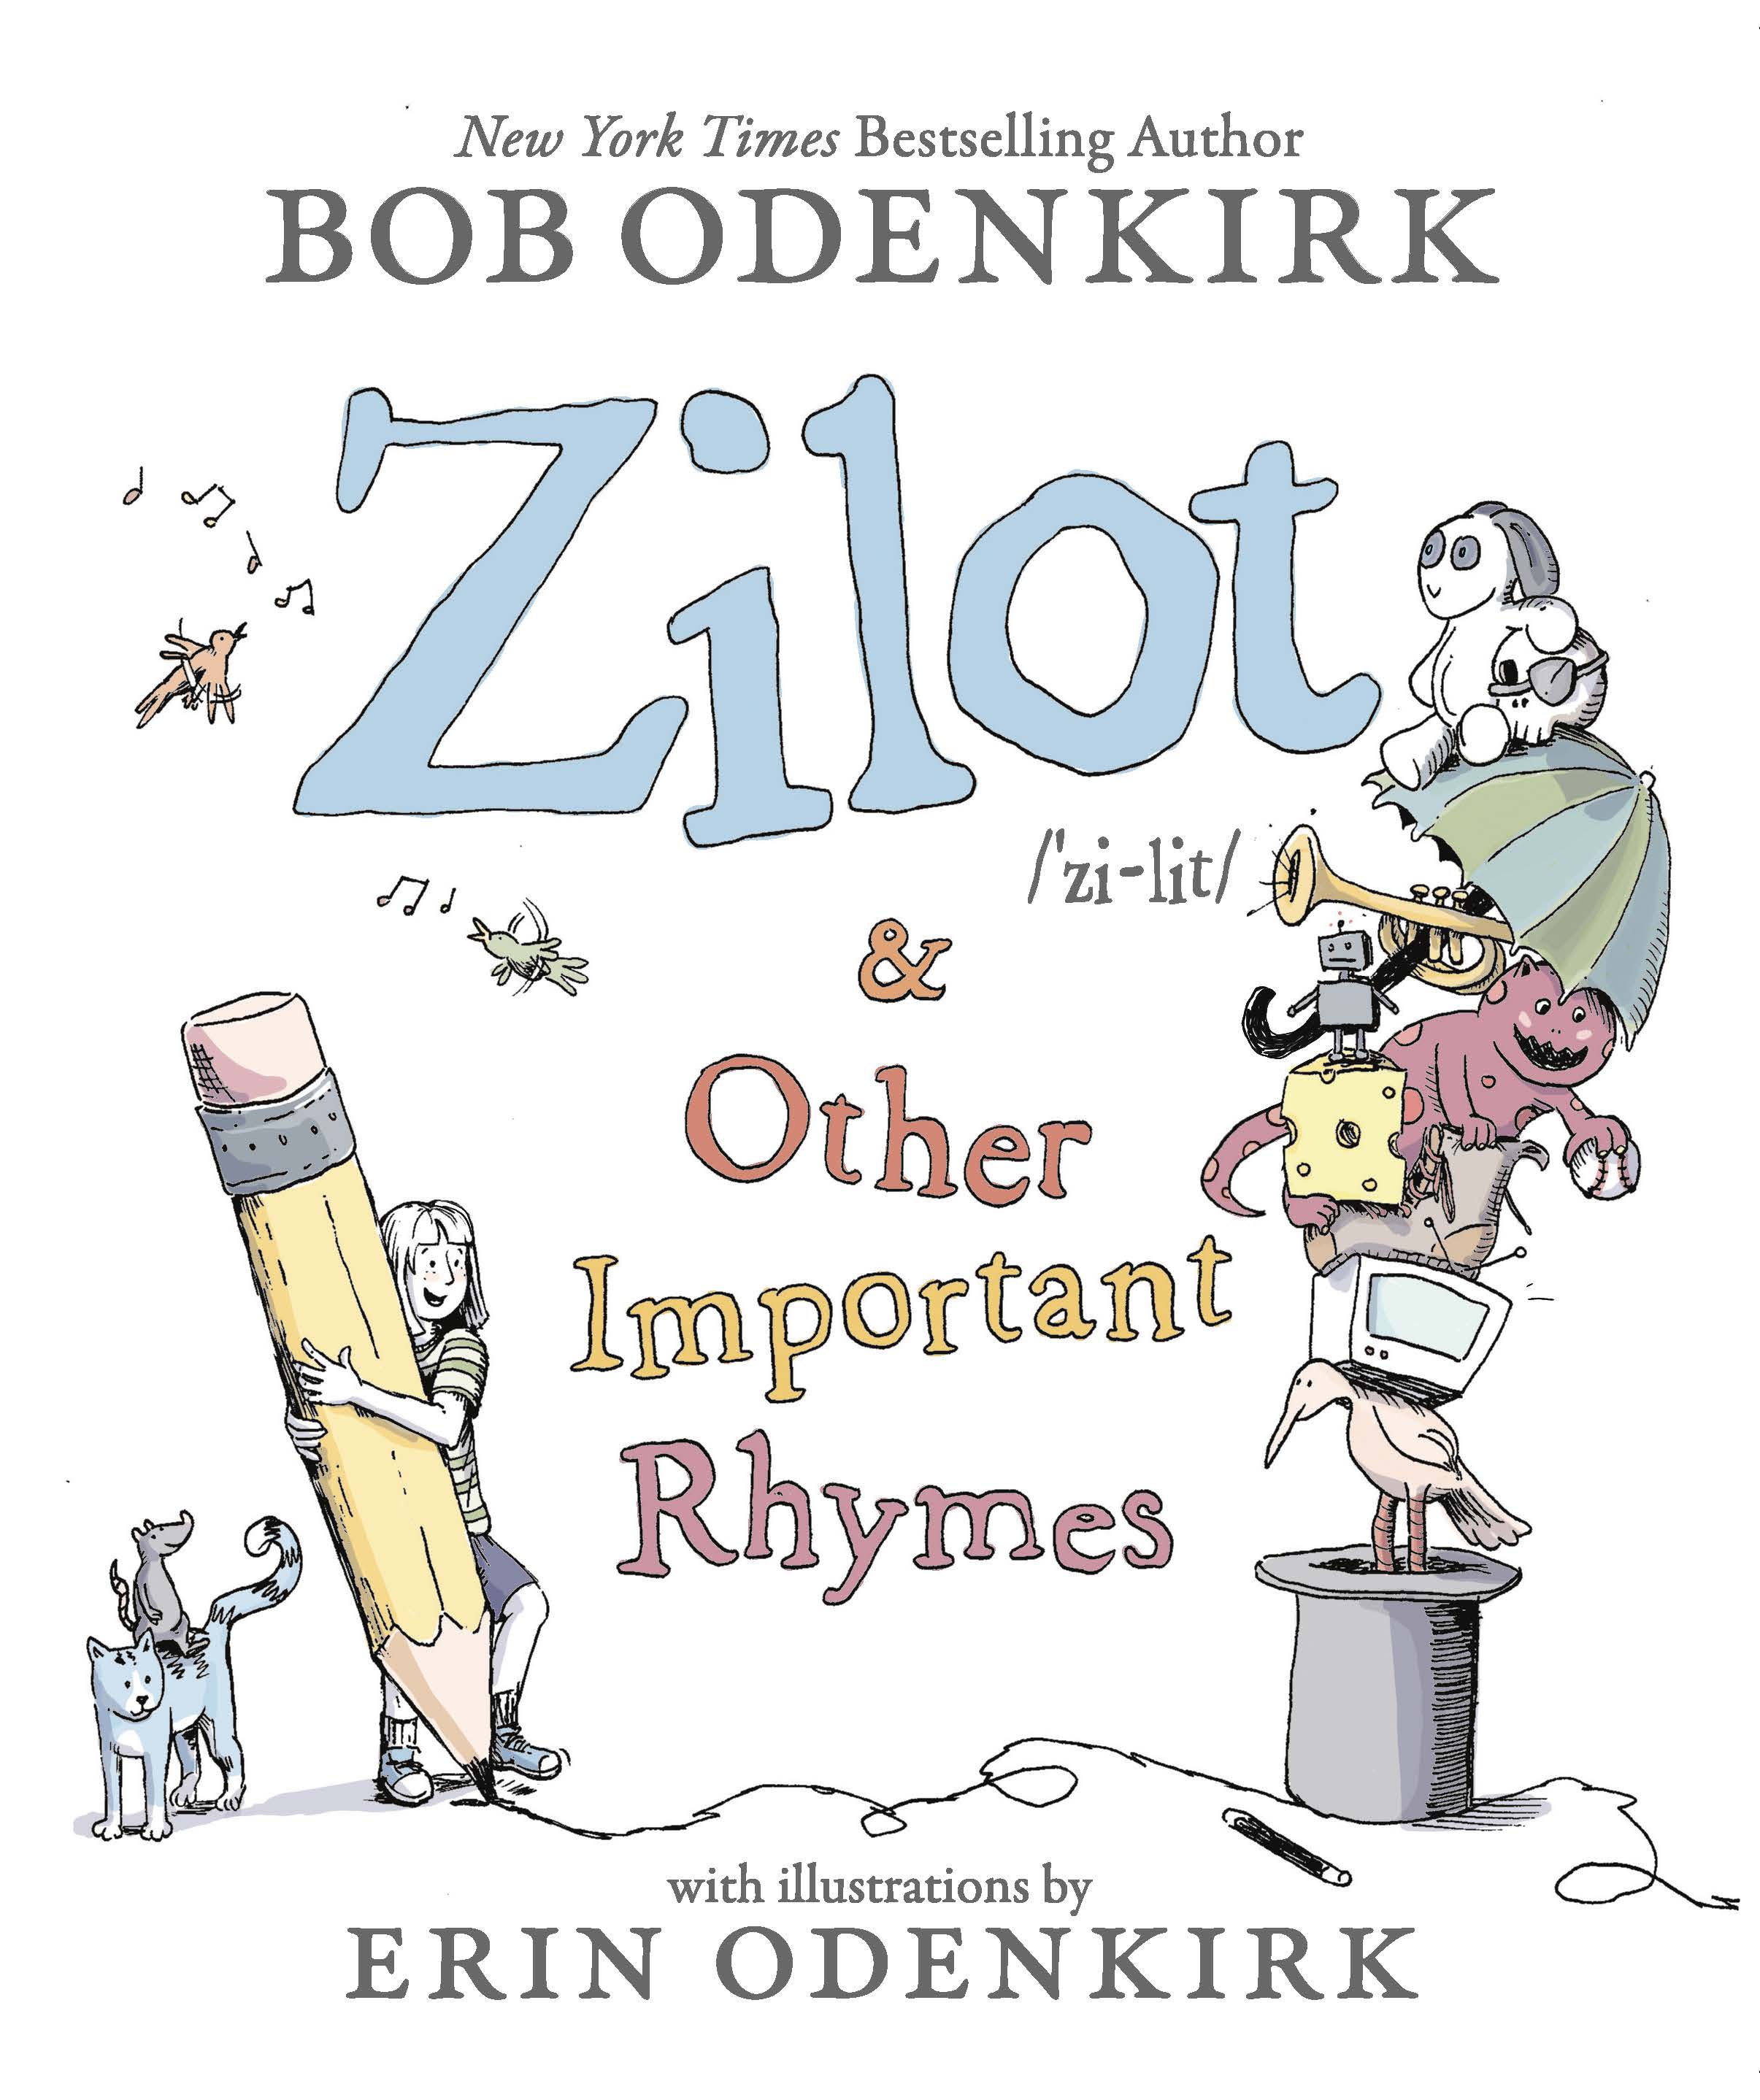 Author Event with Bob & Erin Odenkirk/Zilot & Other Important Rhymes